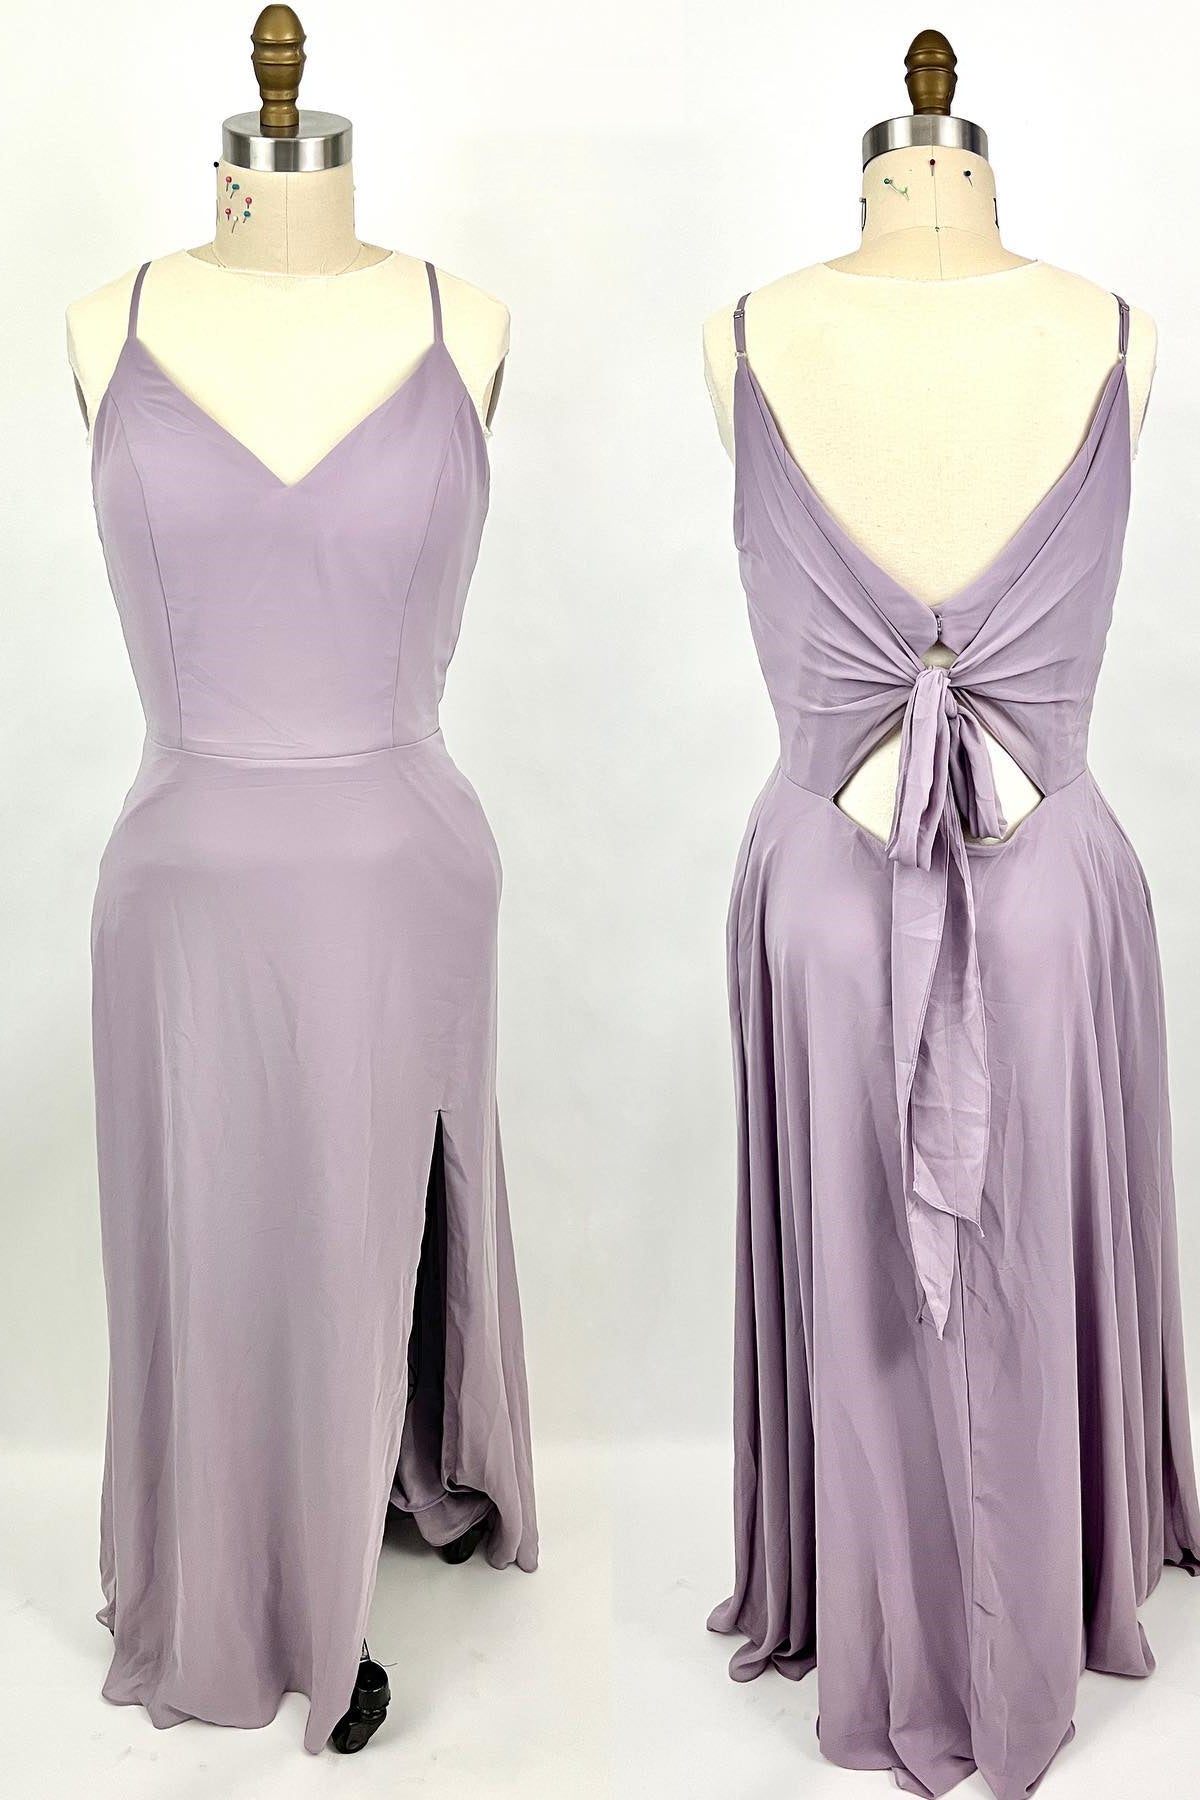 Party Dresses Fall, Straps Purple A-line Long Bridesmaid Dress with Tie Back